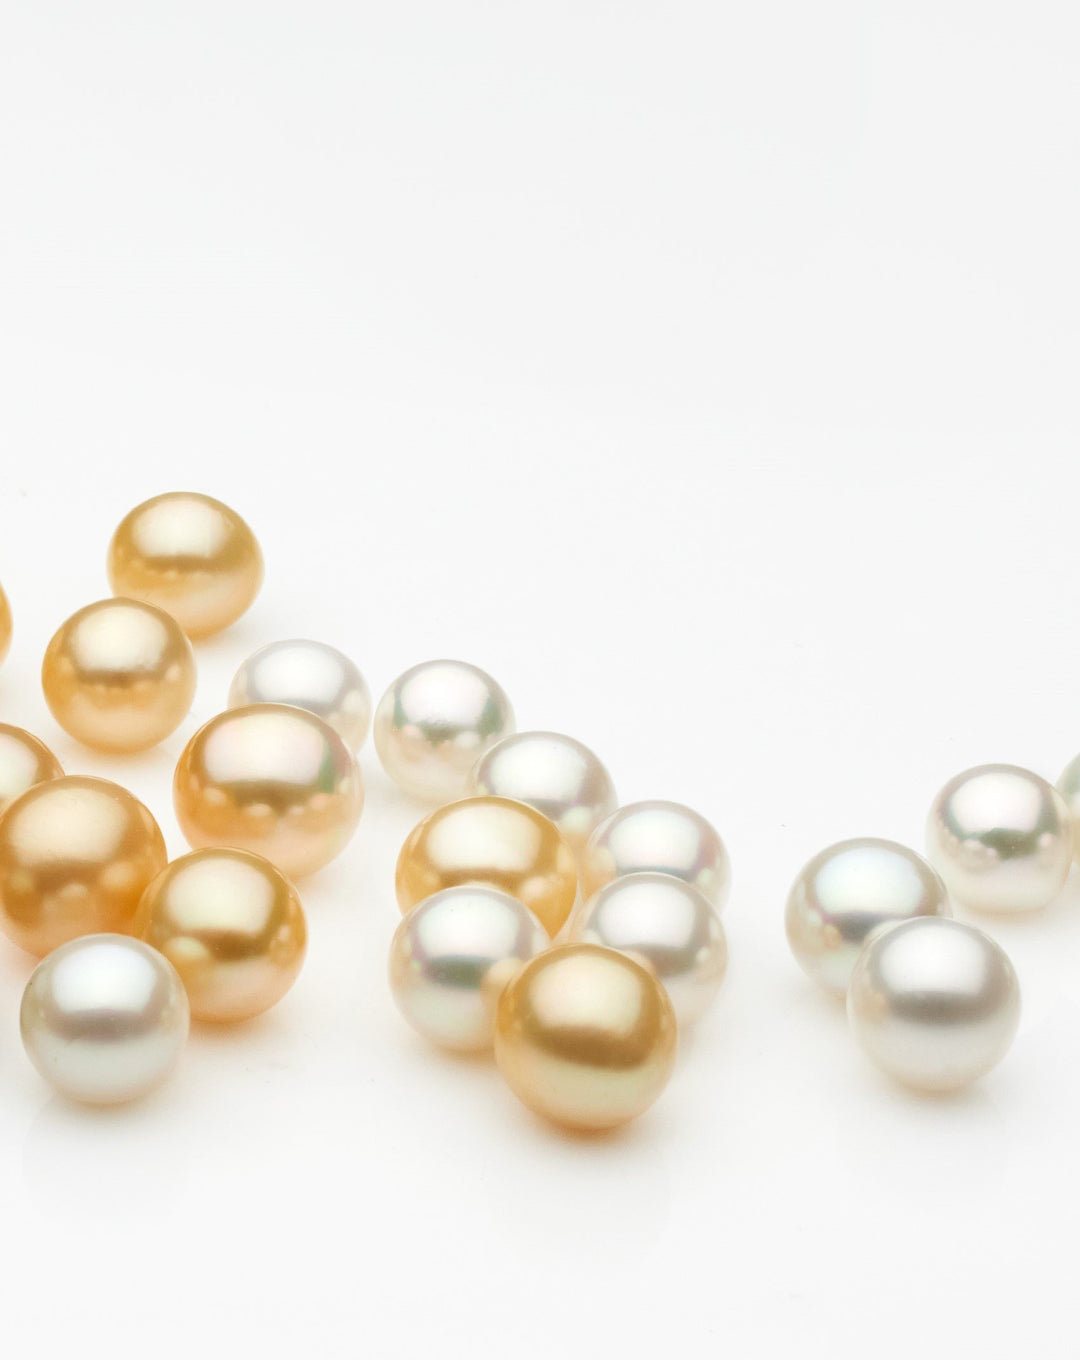 Different sizes of pearls to choose from for the perfect pearl necklace